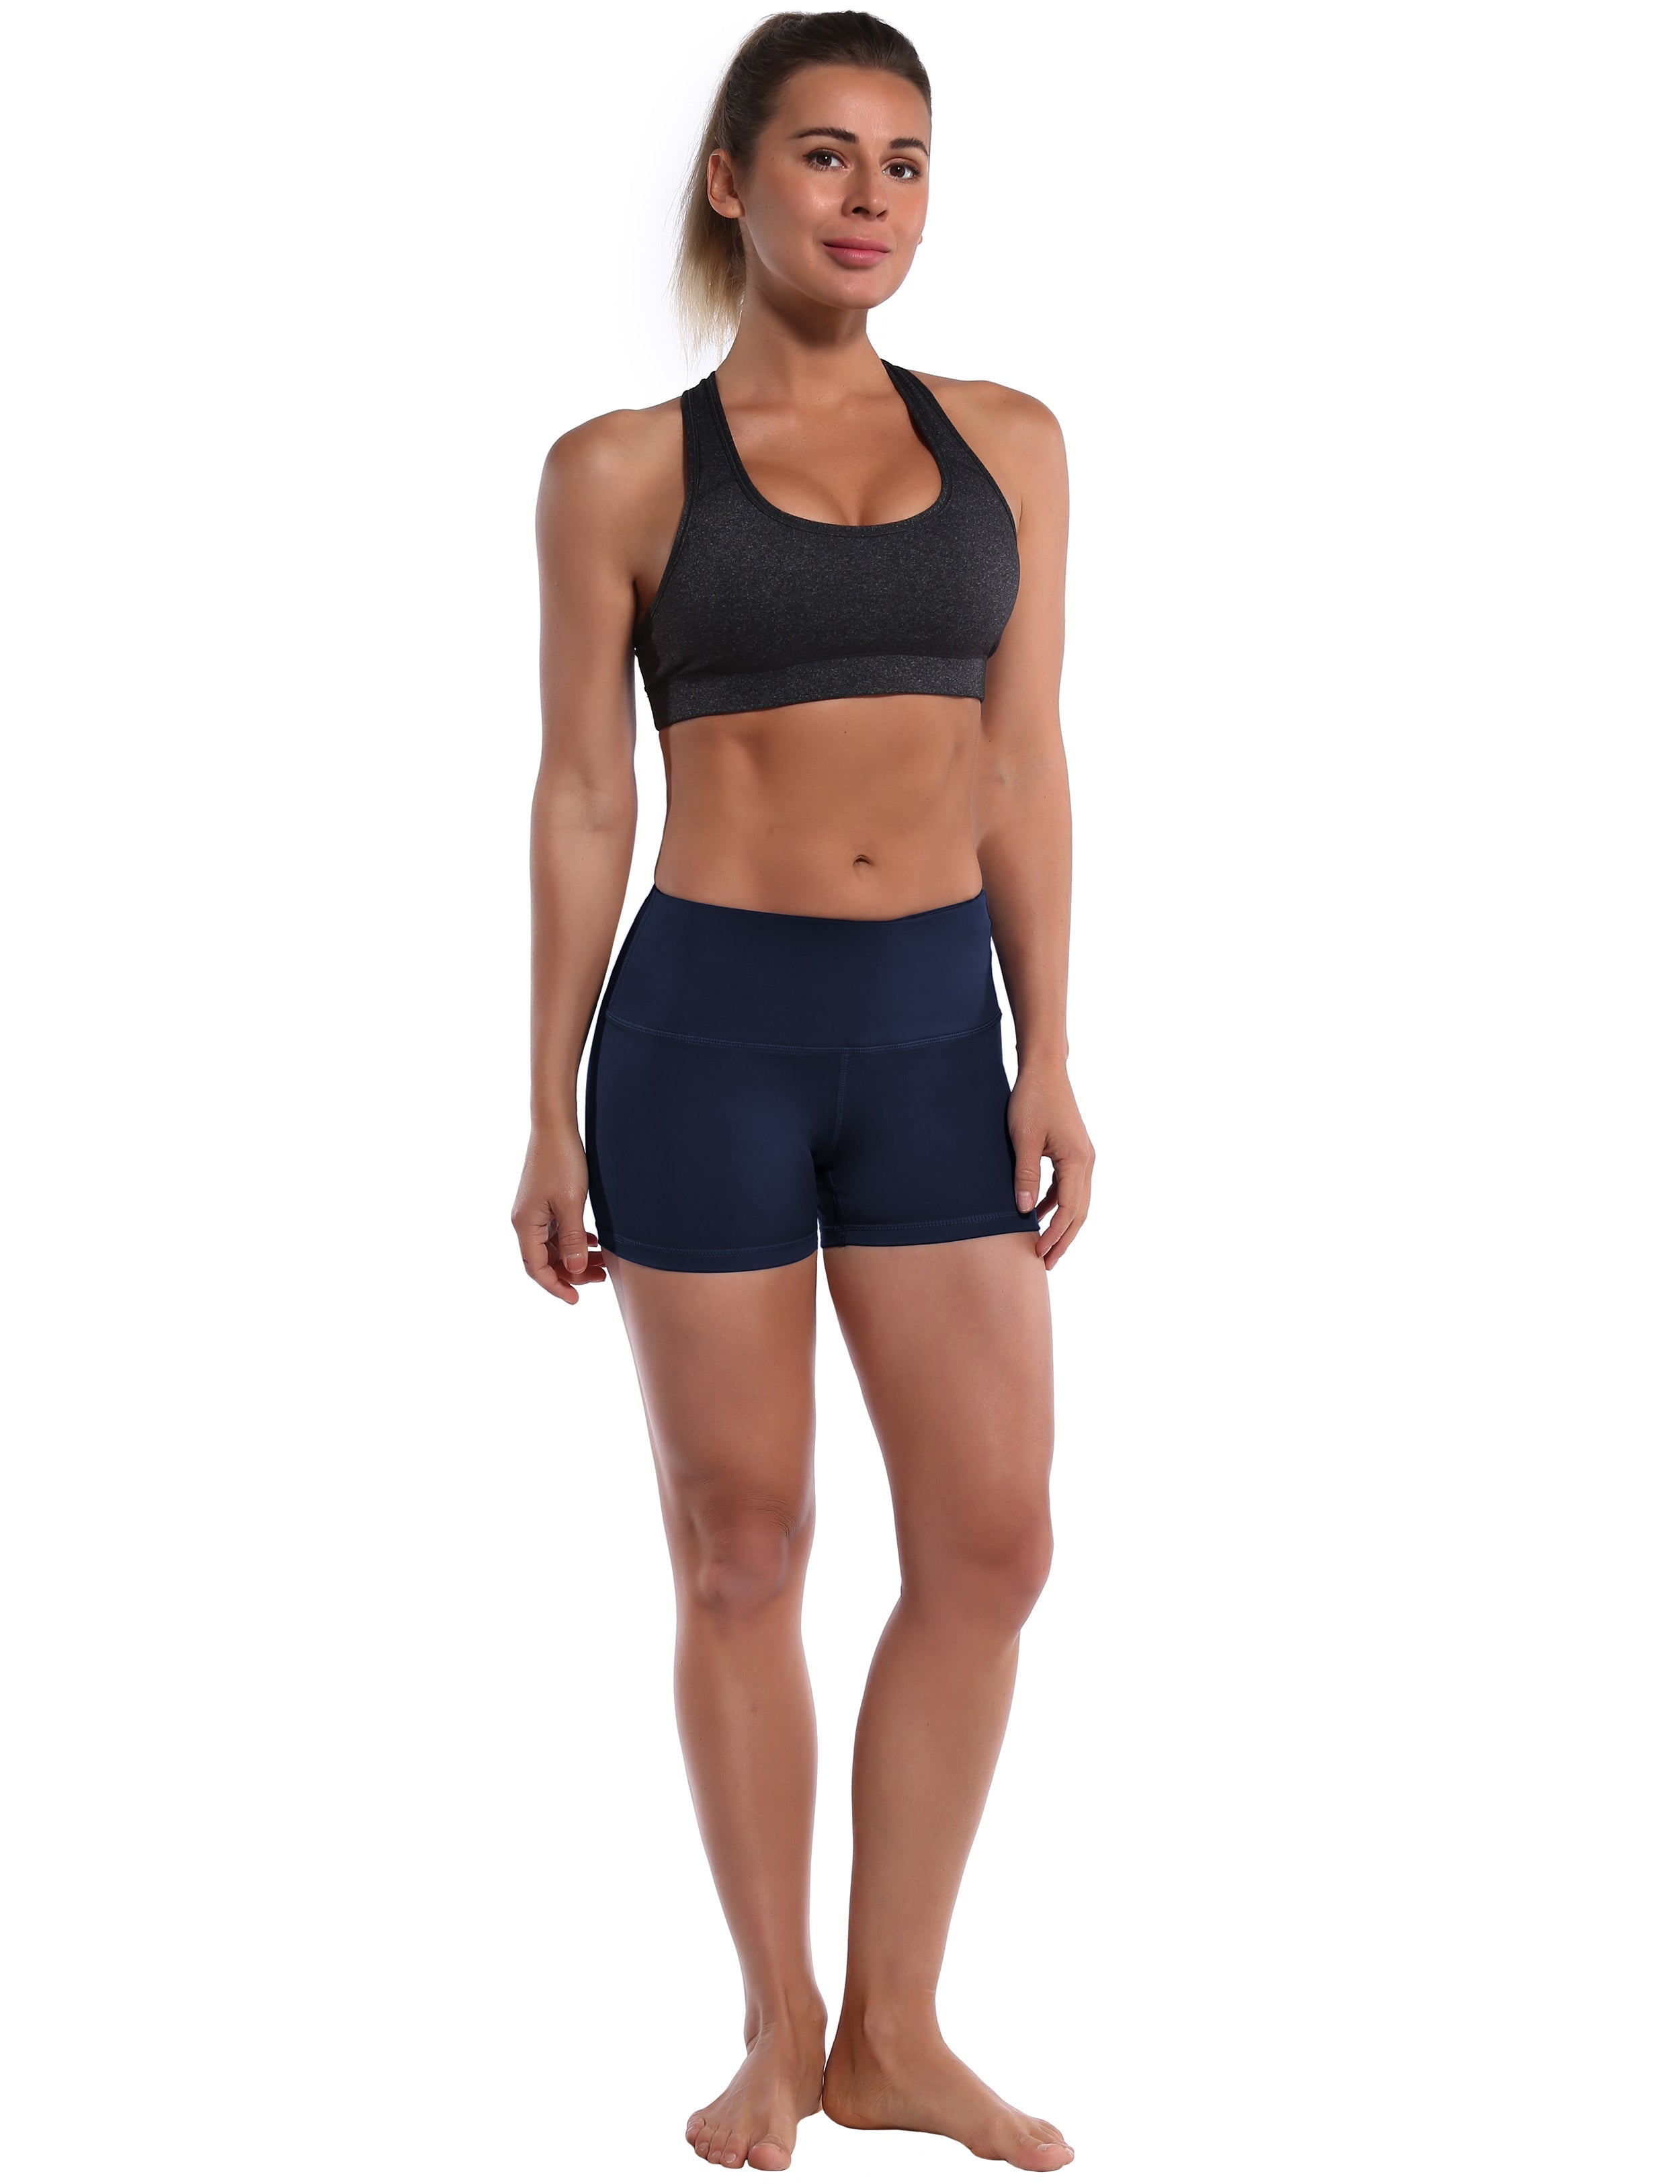 2.5" Jogging Shorts darknavy Softest-ever fabric High elasticity High density 4-way stretch Fabric doesn't attract lint easily No see-through Moisture-wicking Machine wash 75% Nylon, 25% Spandex